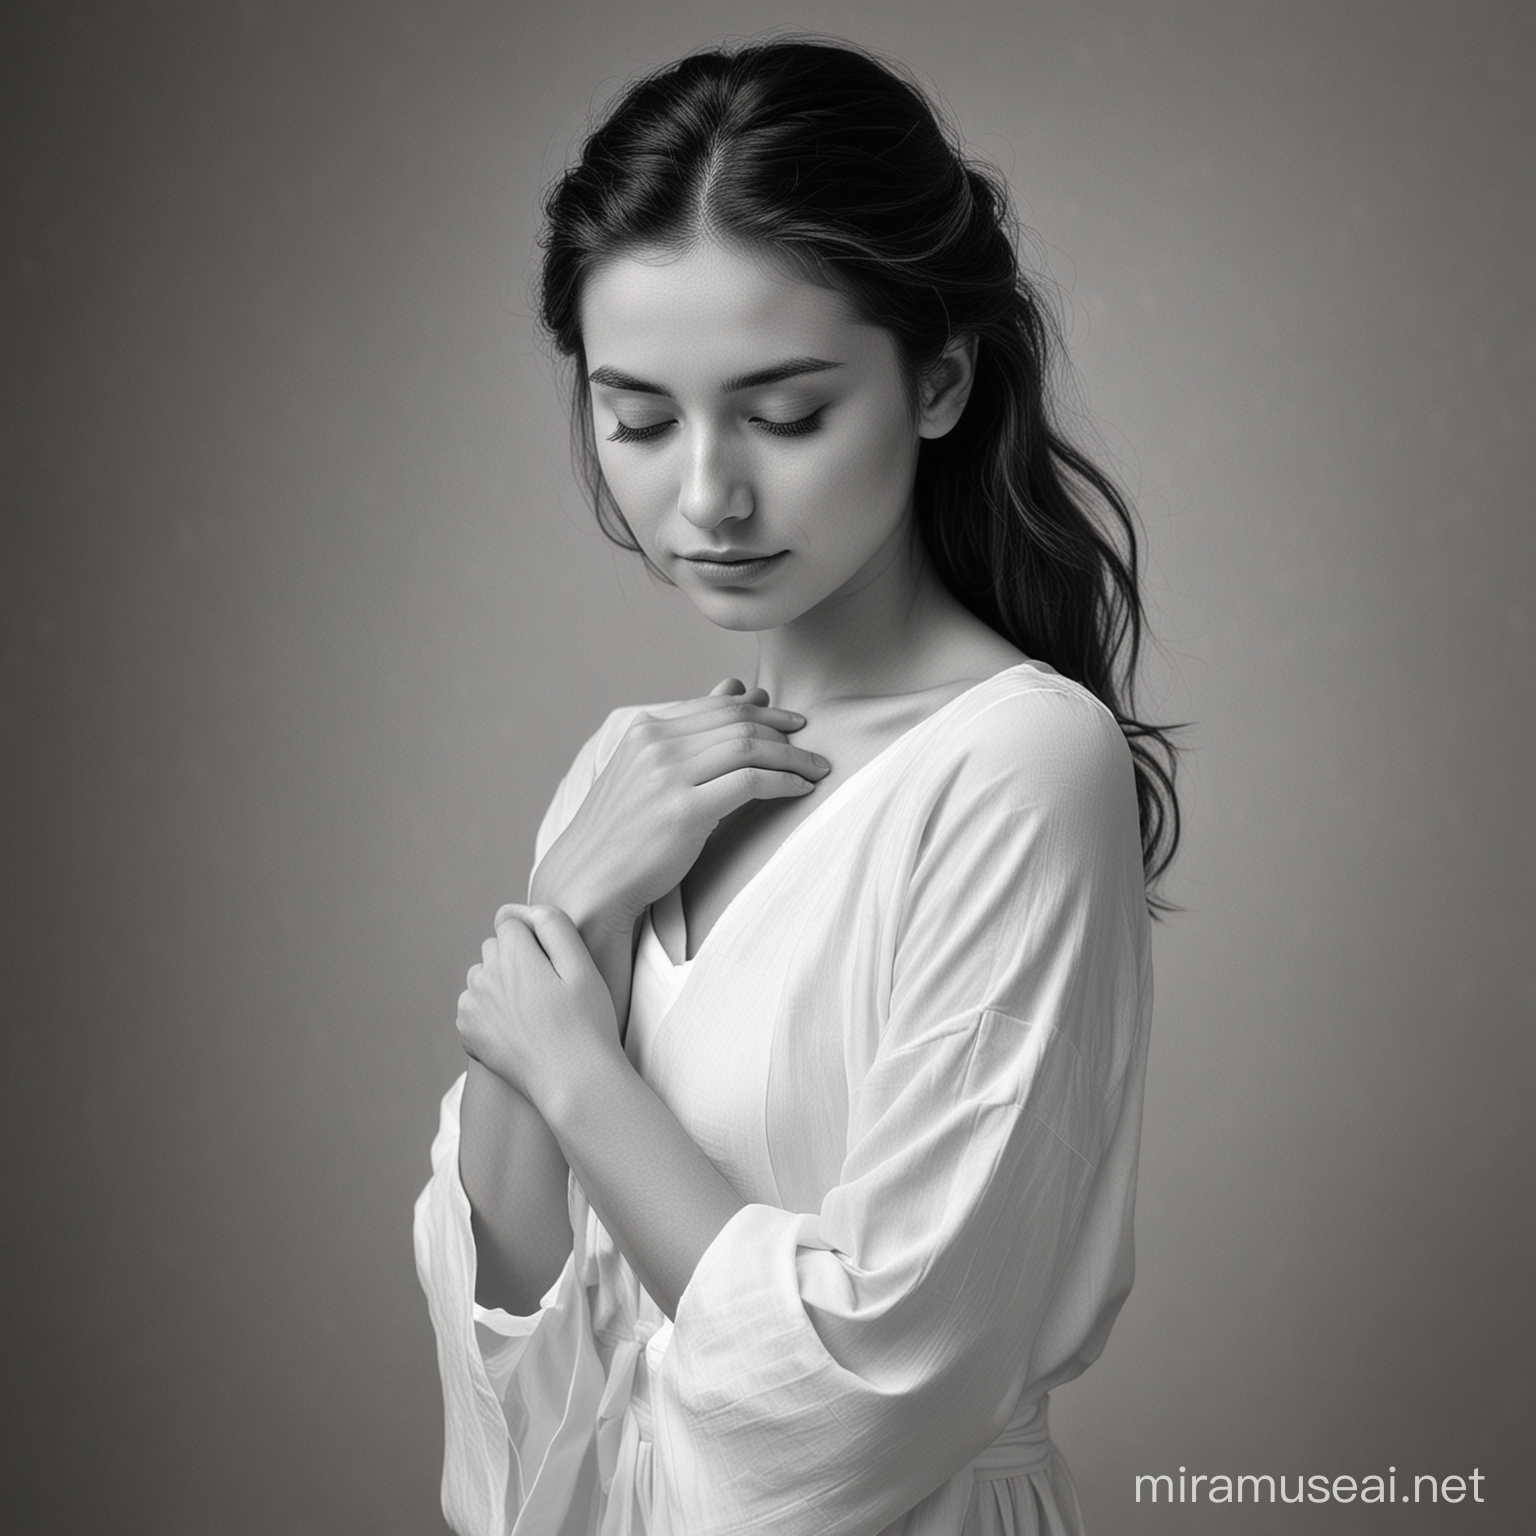 Tranquil Young Woman Embracing Serenity in Monochrome